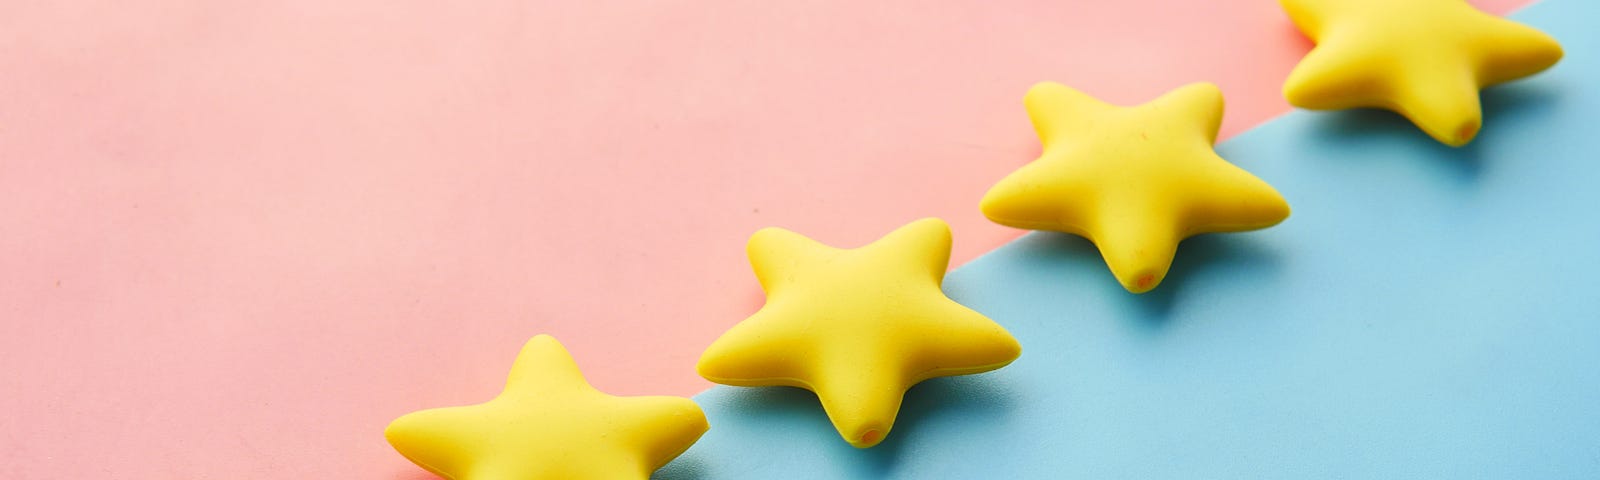 five star crackers lined up in a diagonal row; one side is baby pink and the other side is baby blue. The crackers themselves are yellow